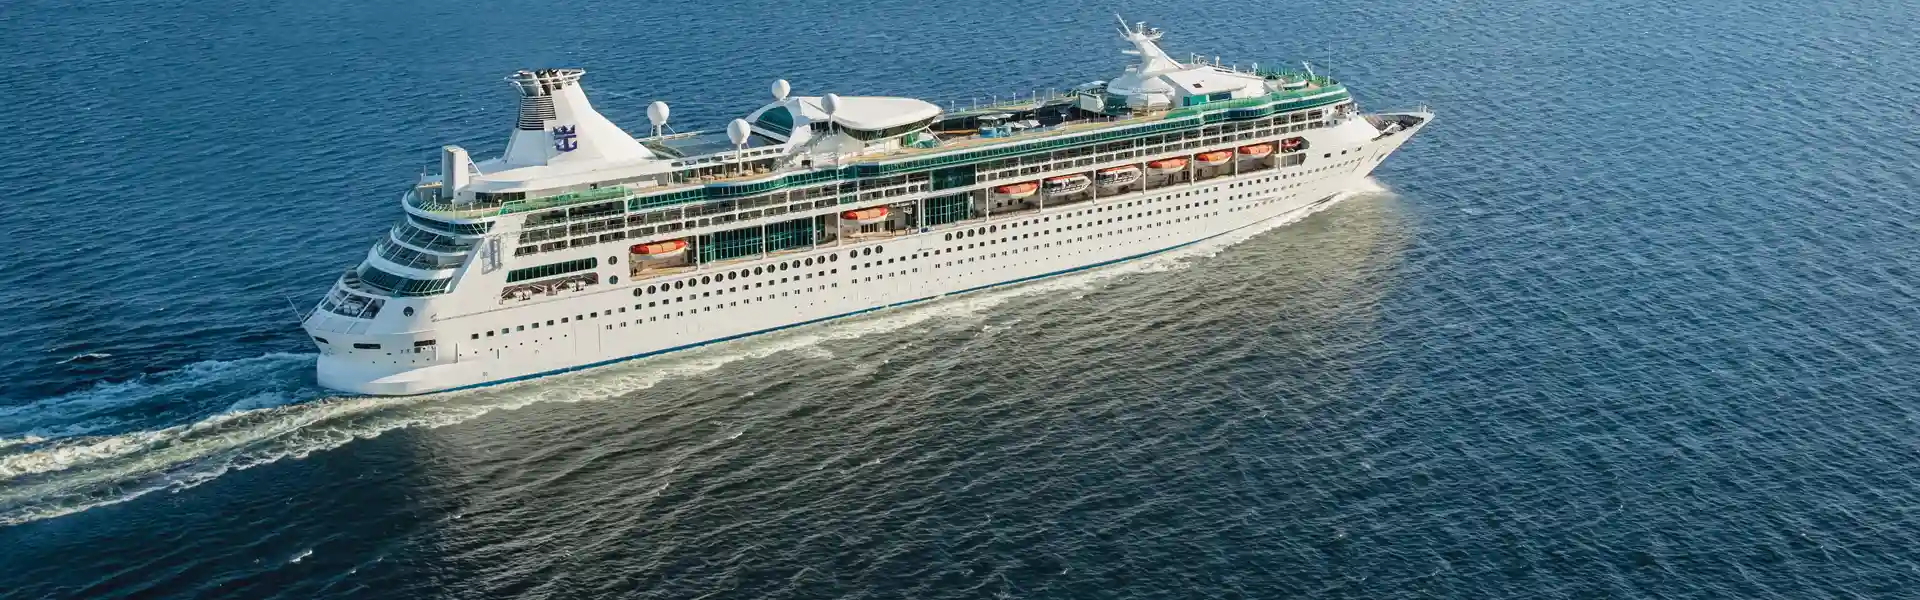 Cruises Starting From $1000 to $3000